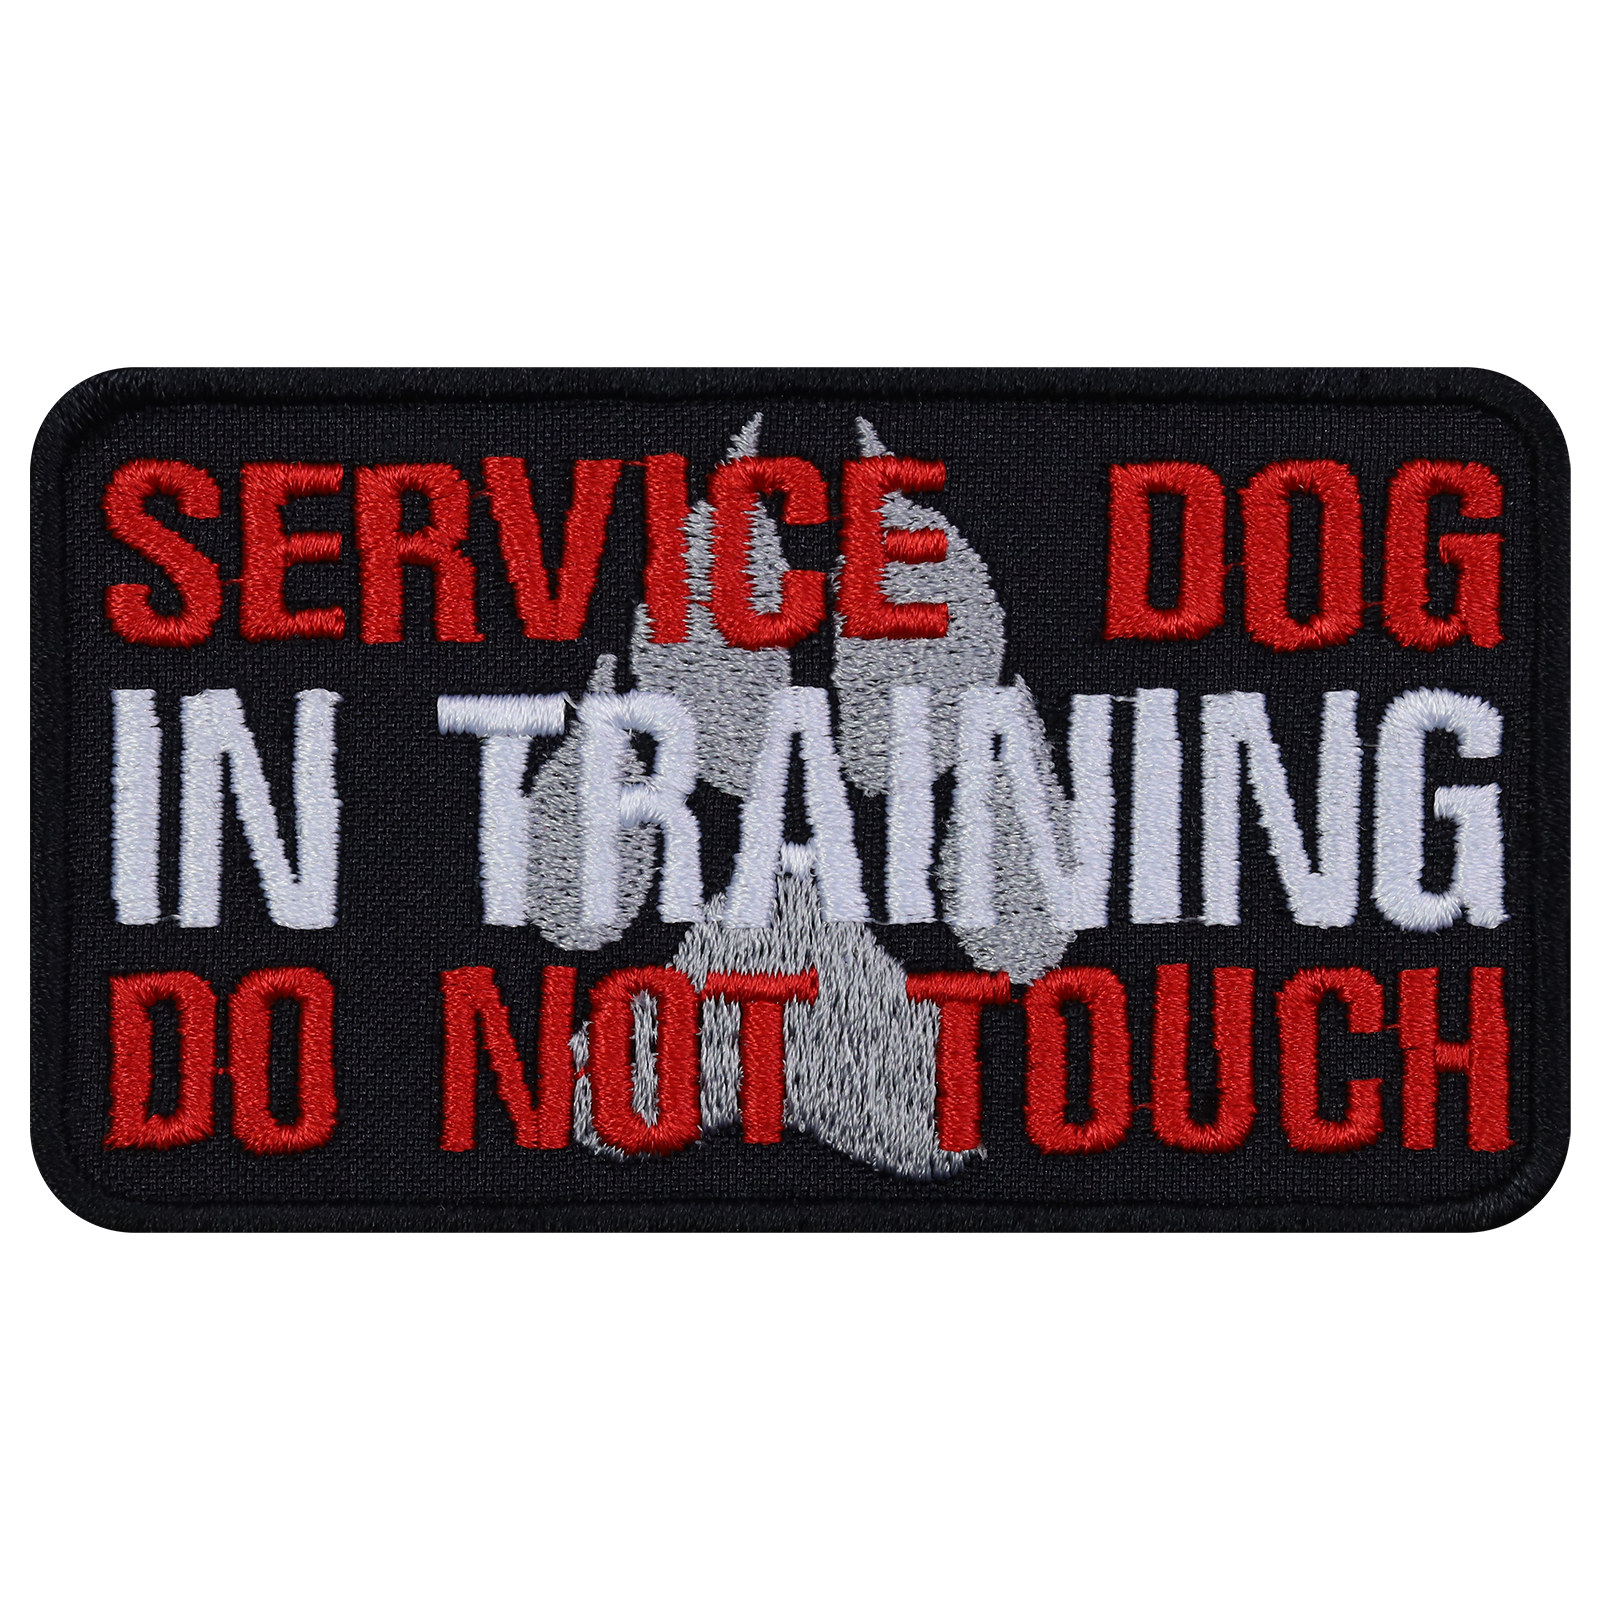 Service dog in training - Patch